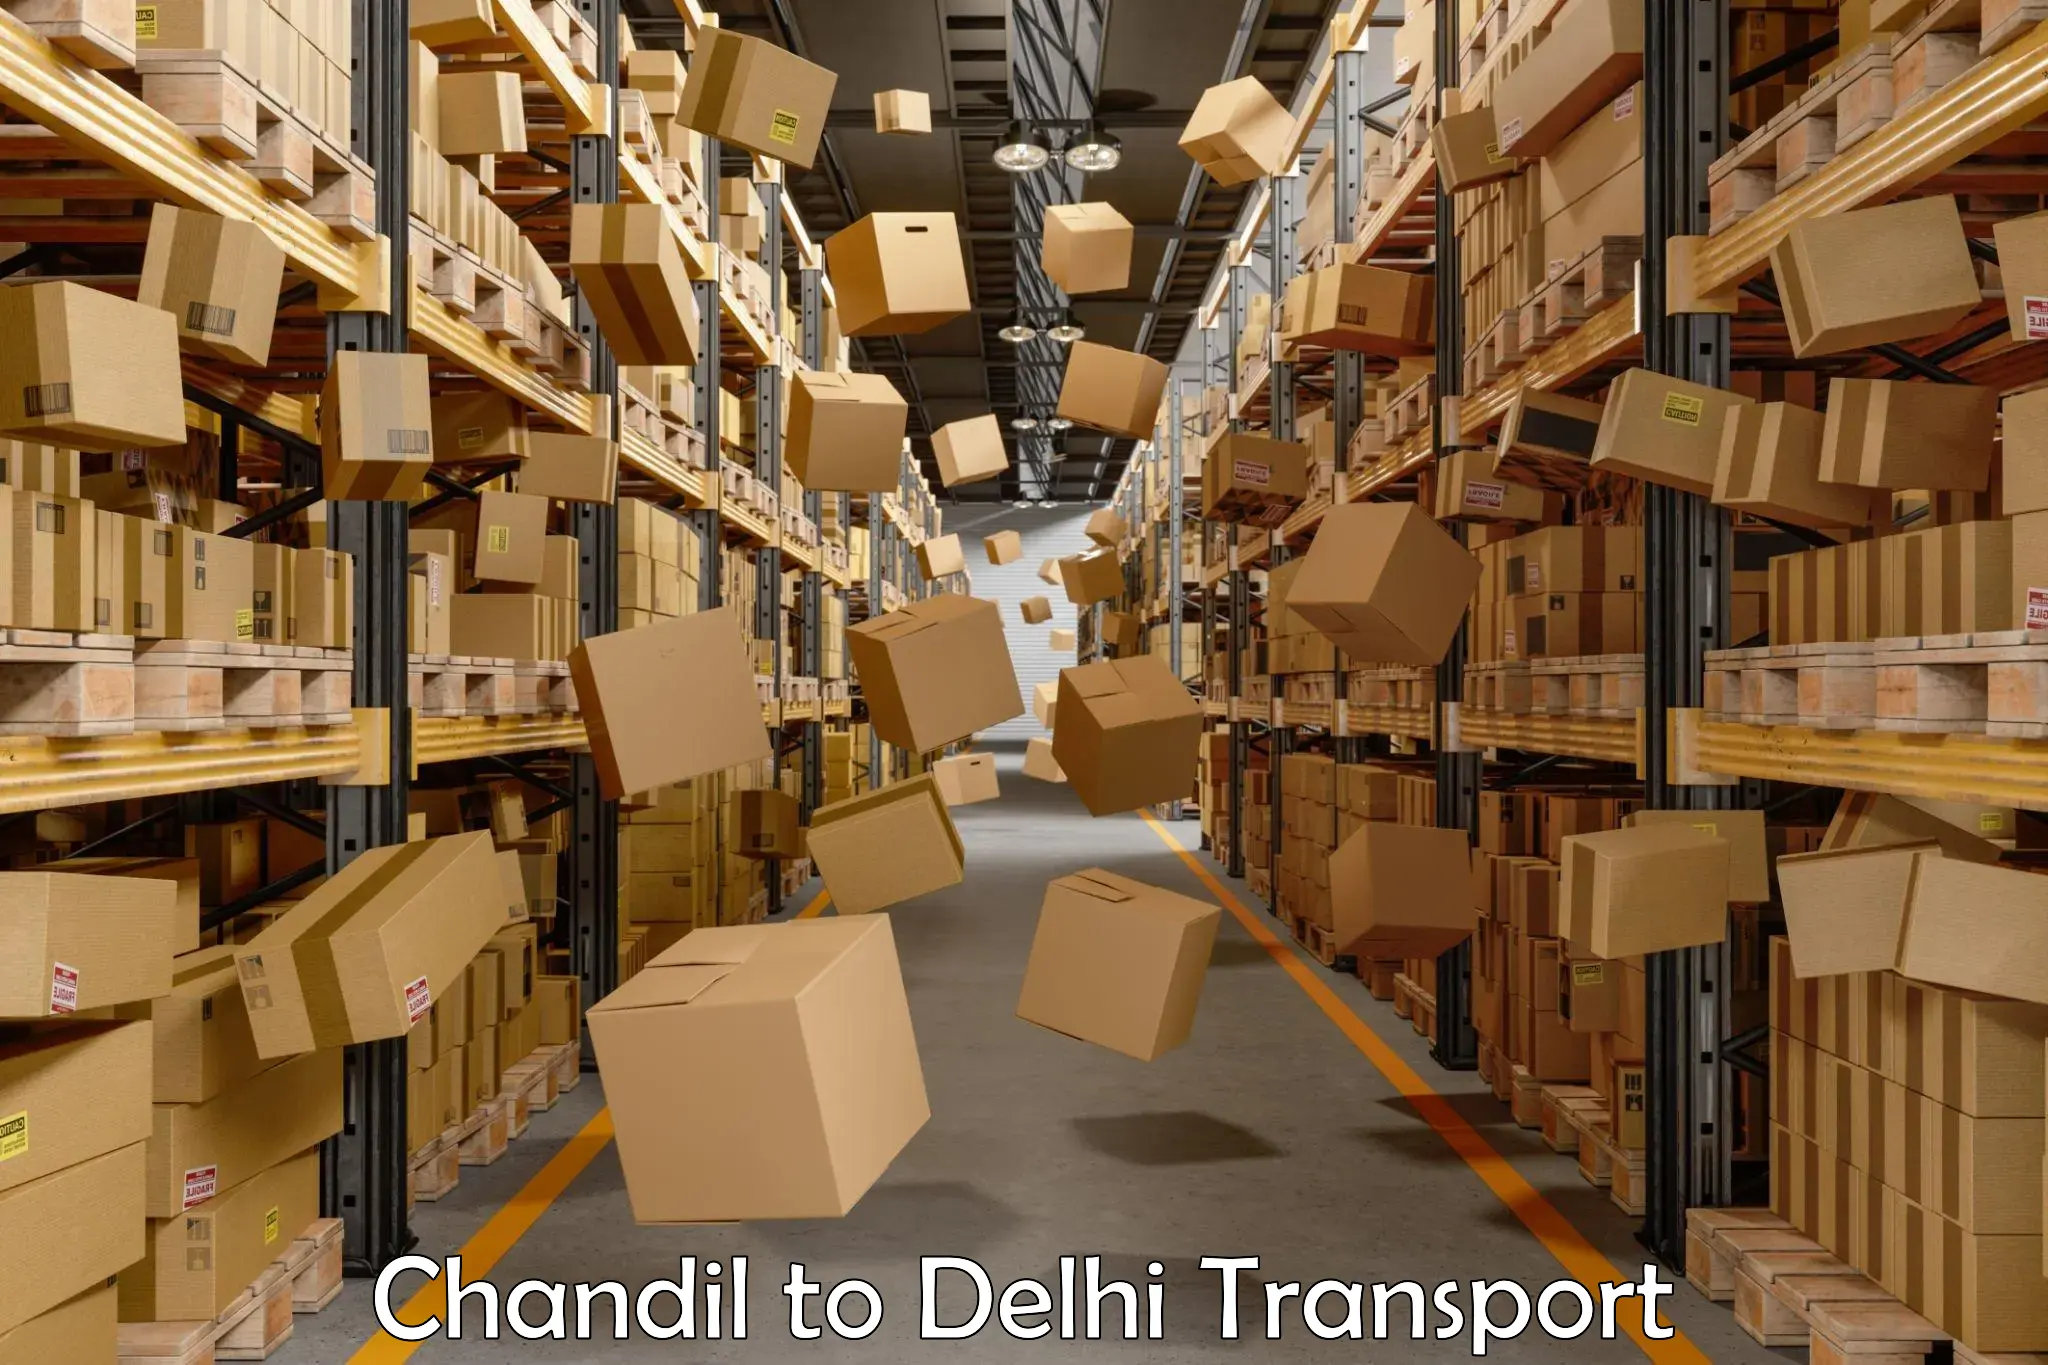 Container transport service Chandil to Lodhi Road